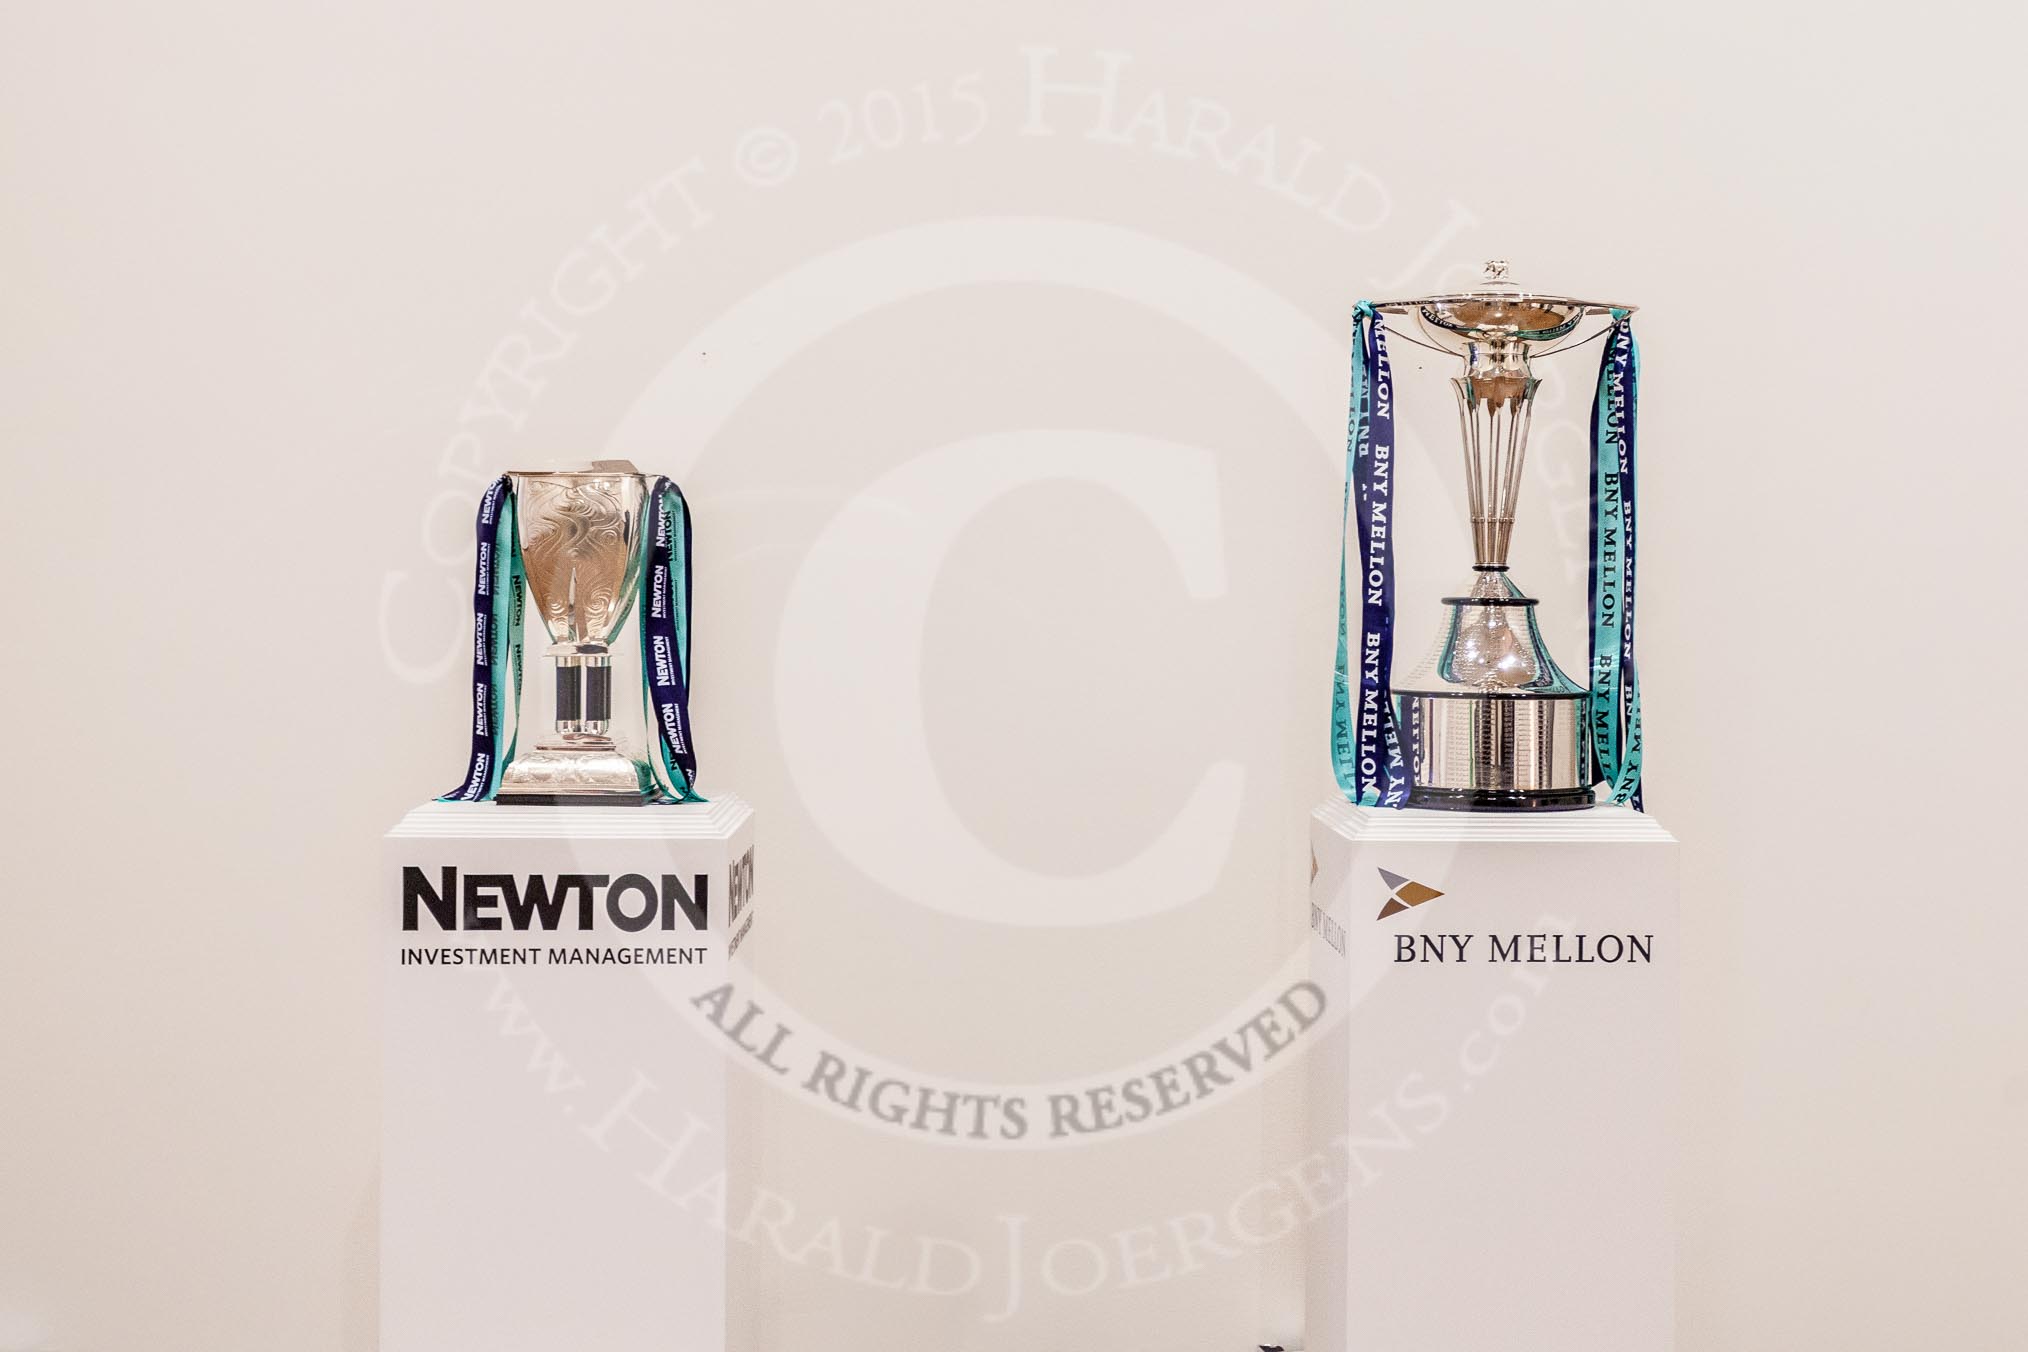 The Newton Women's Boat Race tropy and the BNY Mellon Boat Race trophy together